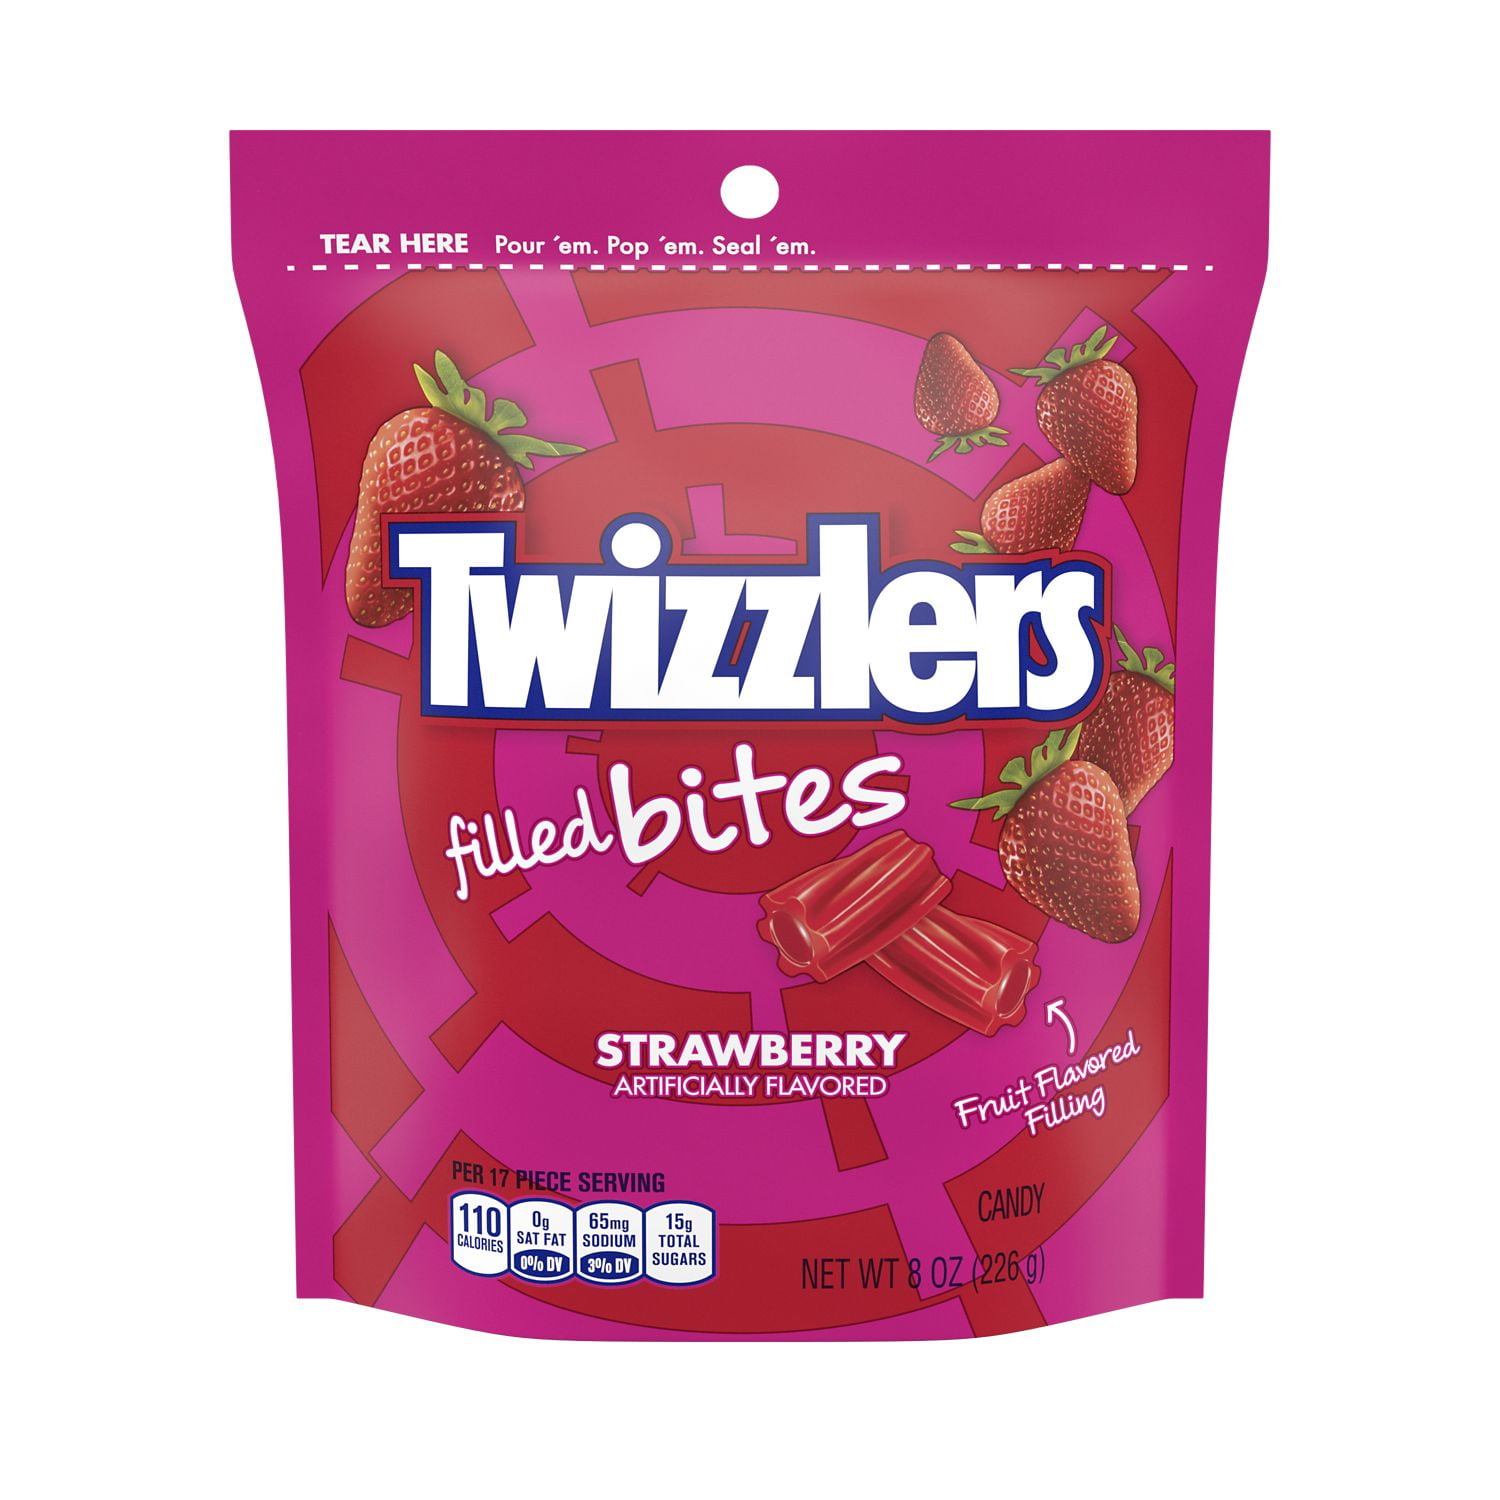 TWIZZLERS, Filled Bites Strawberry Flavored Chewy Candy, Low Fat, 8 oz, Resealable